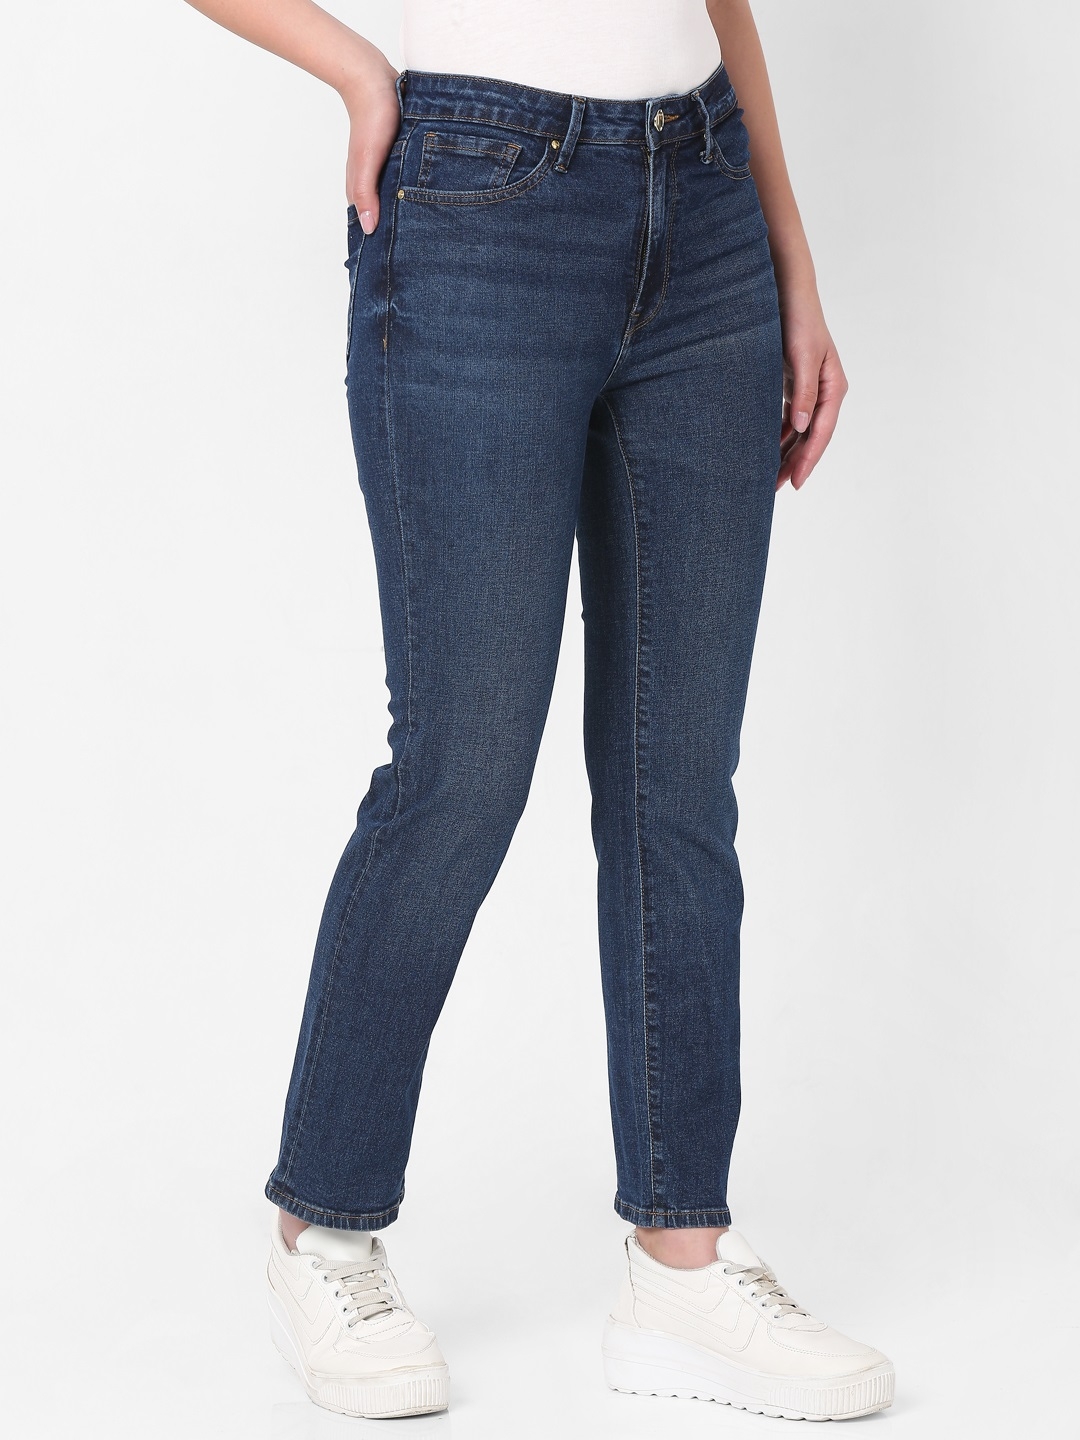 Women's Blue Cotton Solid Flared Jeans